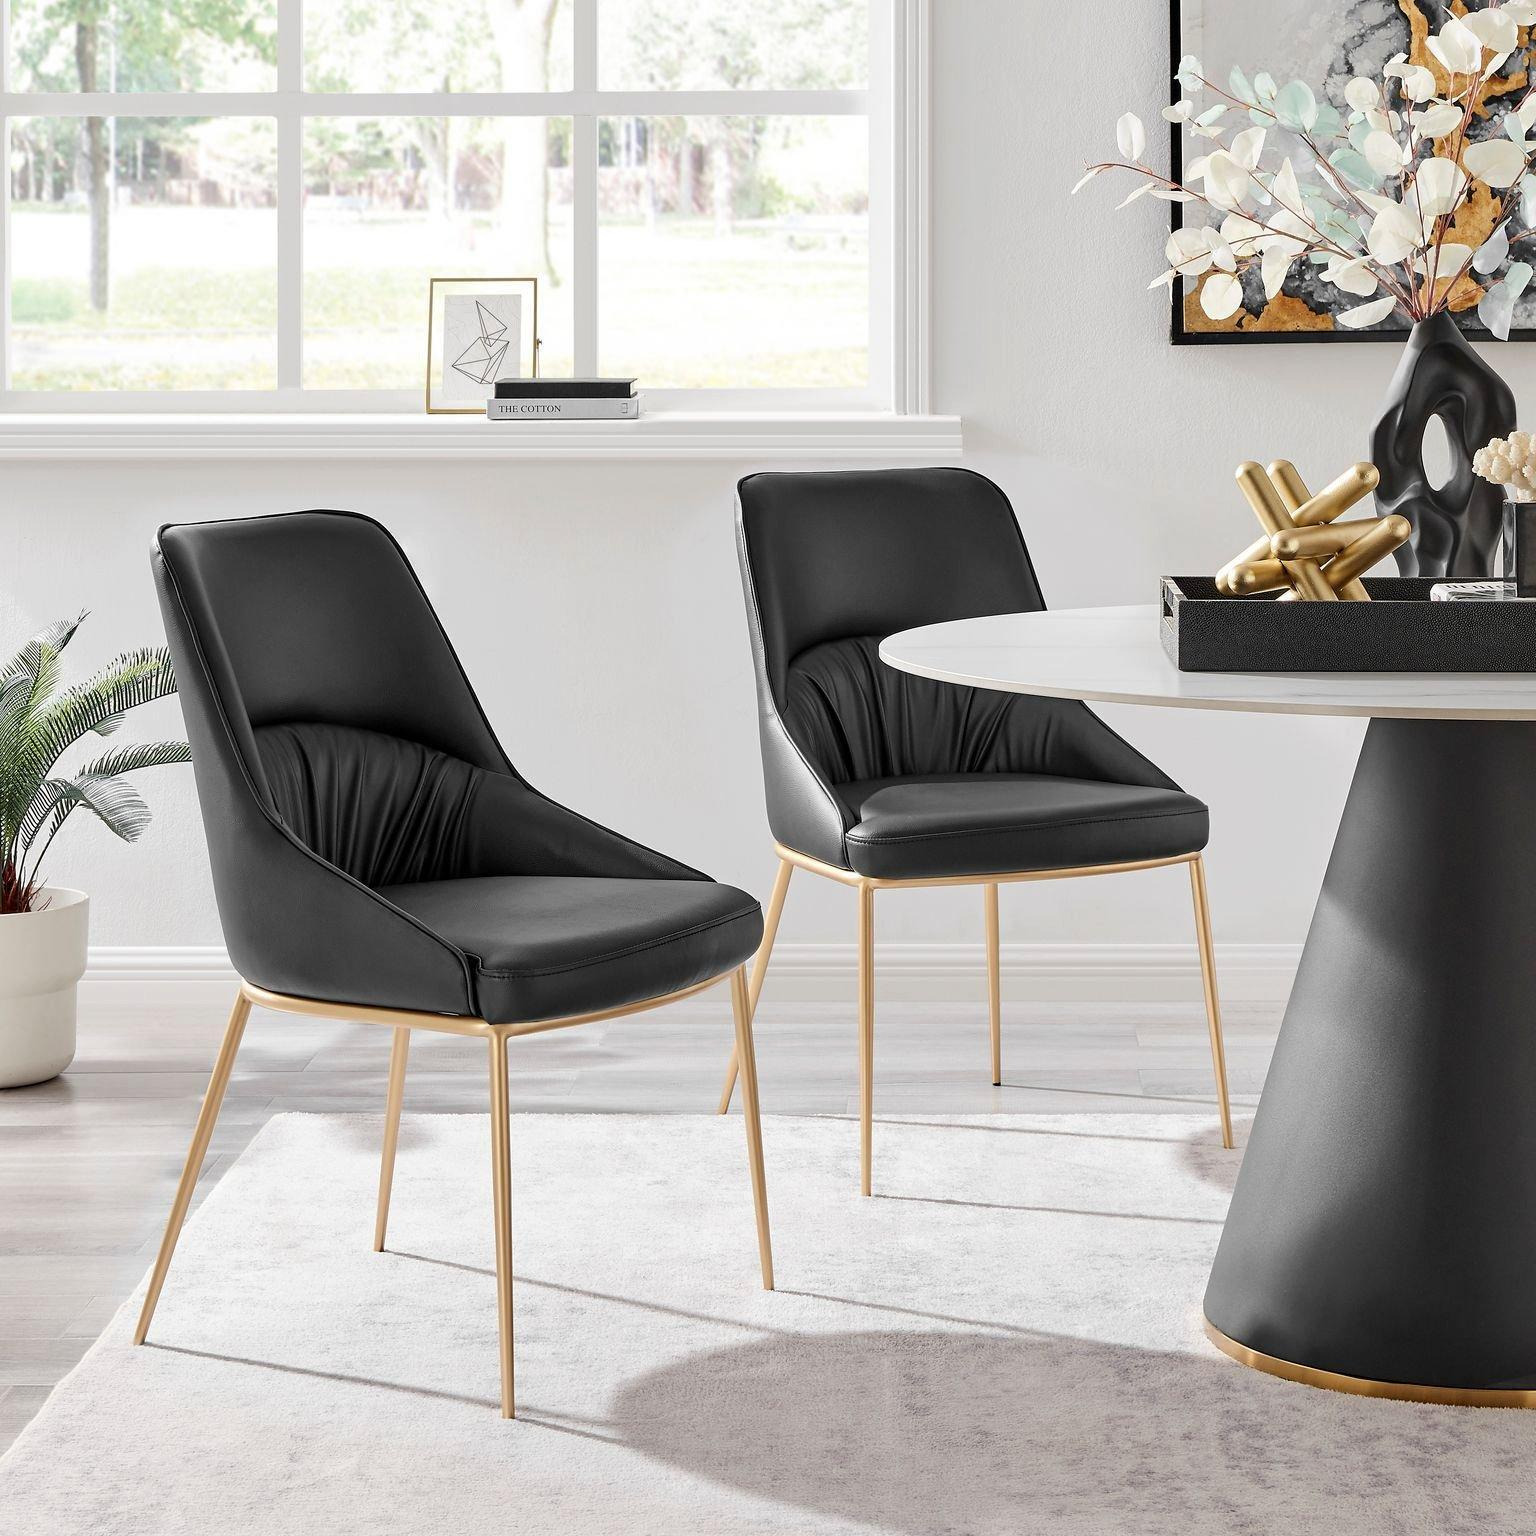 Modern Faux Leather Dining Chairs With Gold Metal Legs Set Of 2 ( Black or Beige ) - image 1